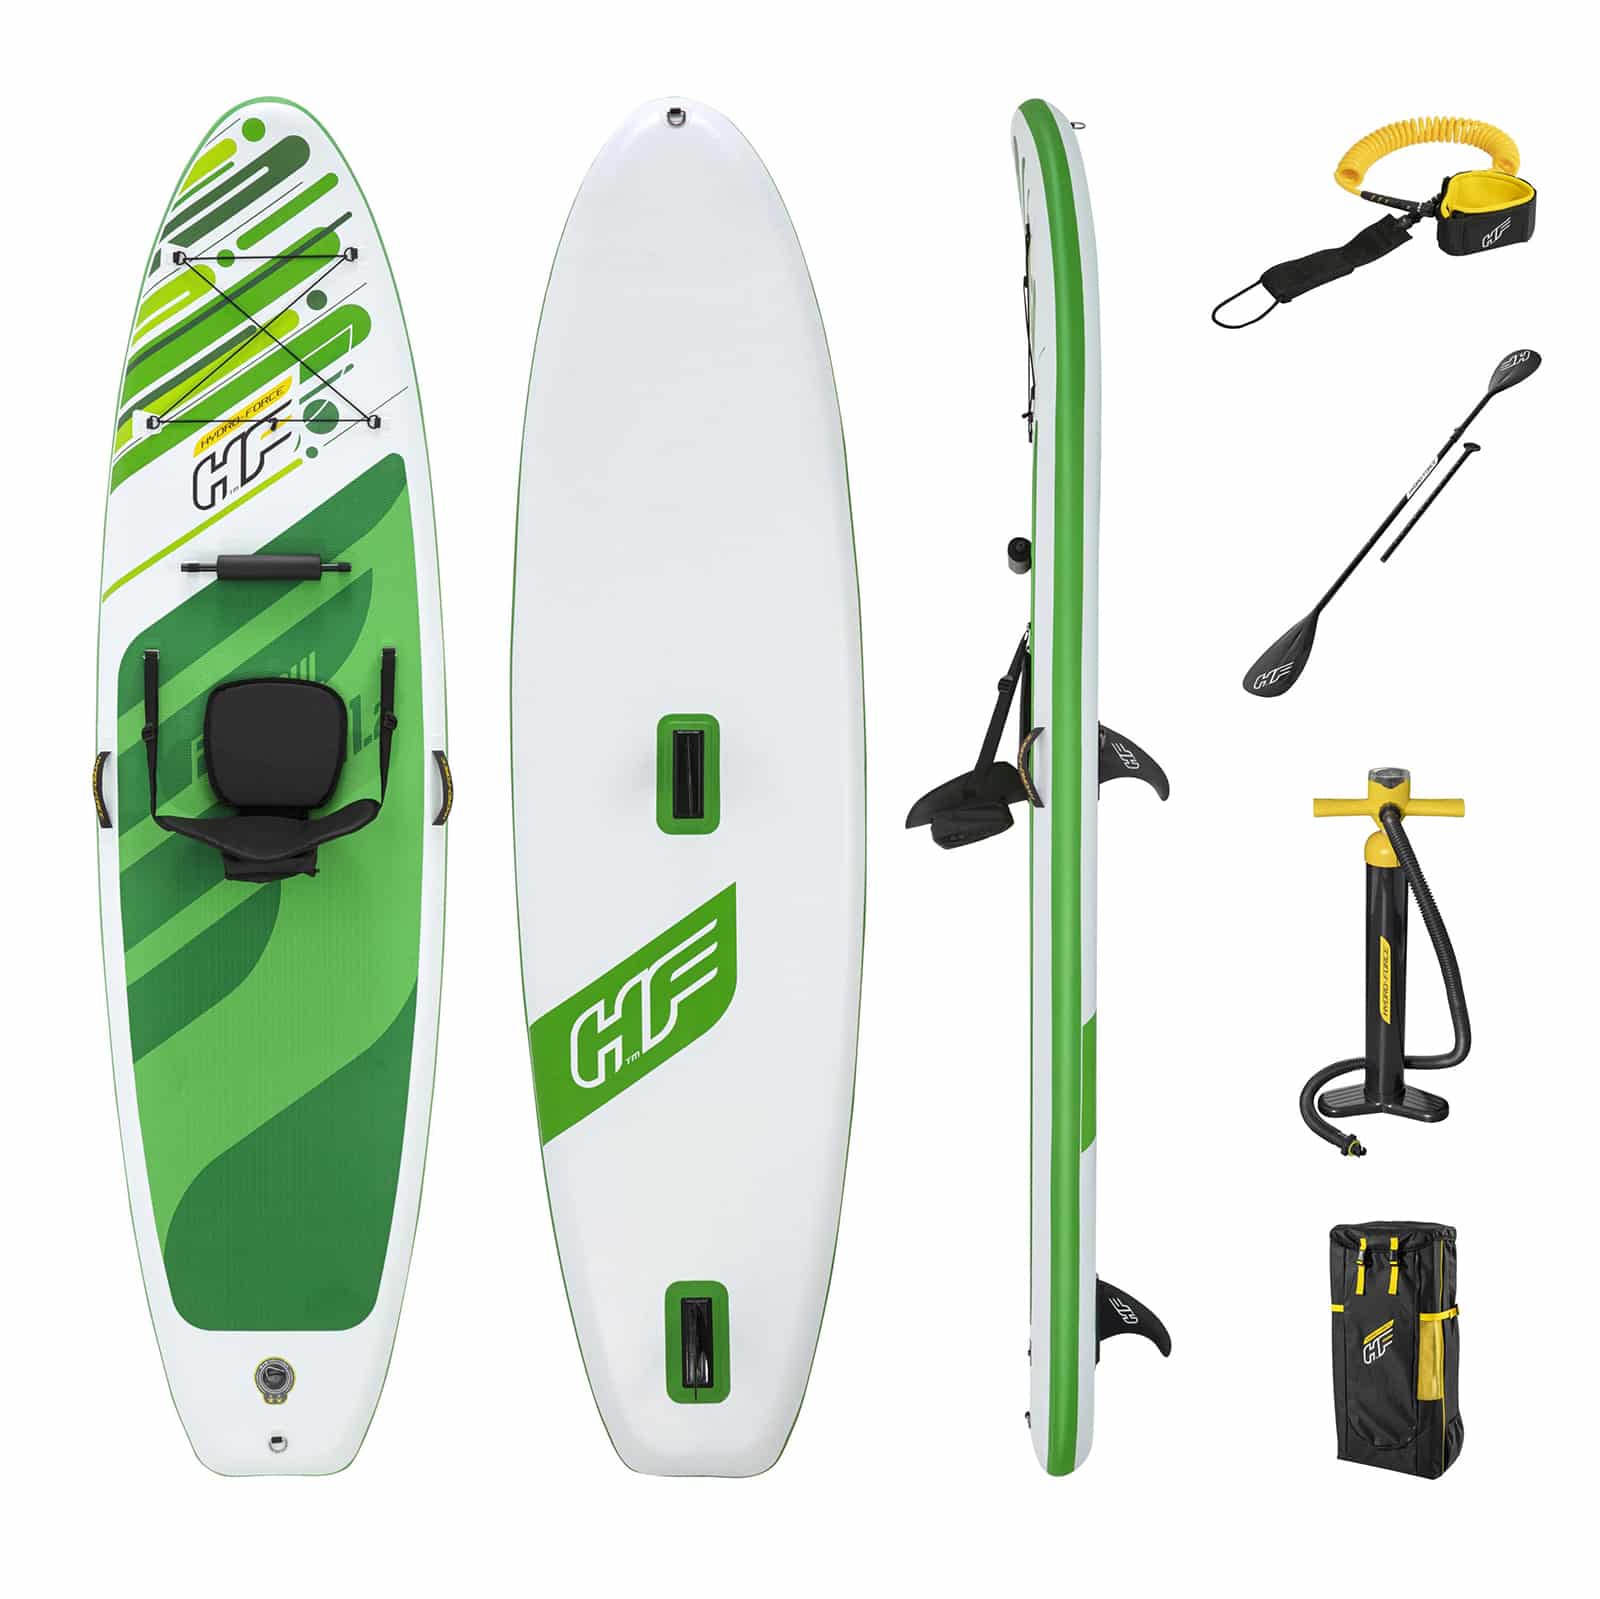 Tabla Paddle Surf Hinchable Bestway Hydro-force Freesoul Tech 340x89x15 Cm Con Remo, Asiento, Bomba